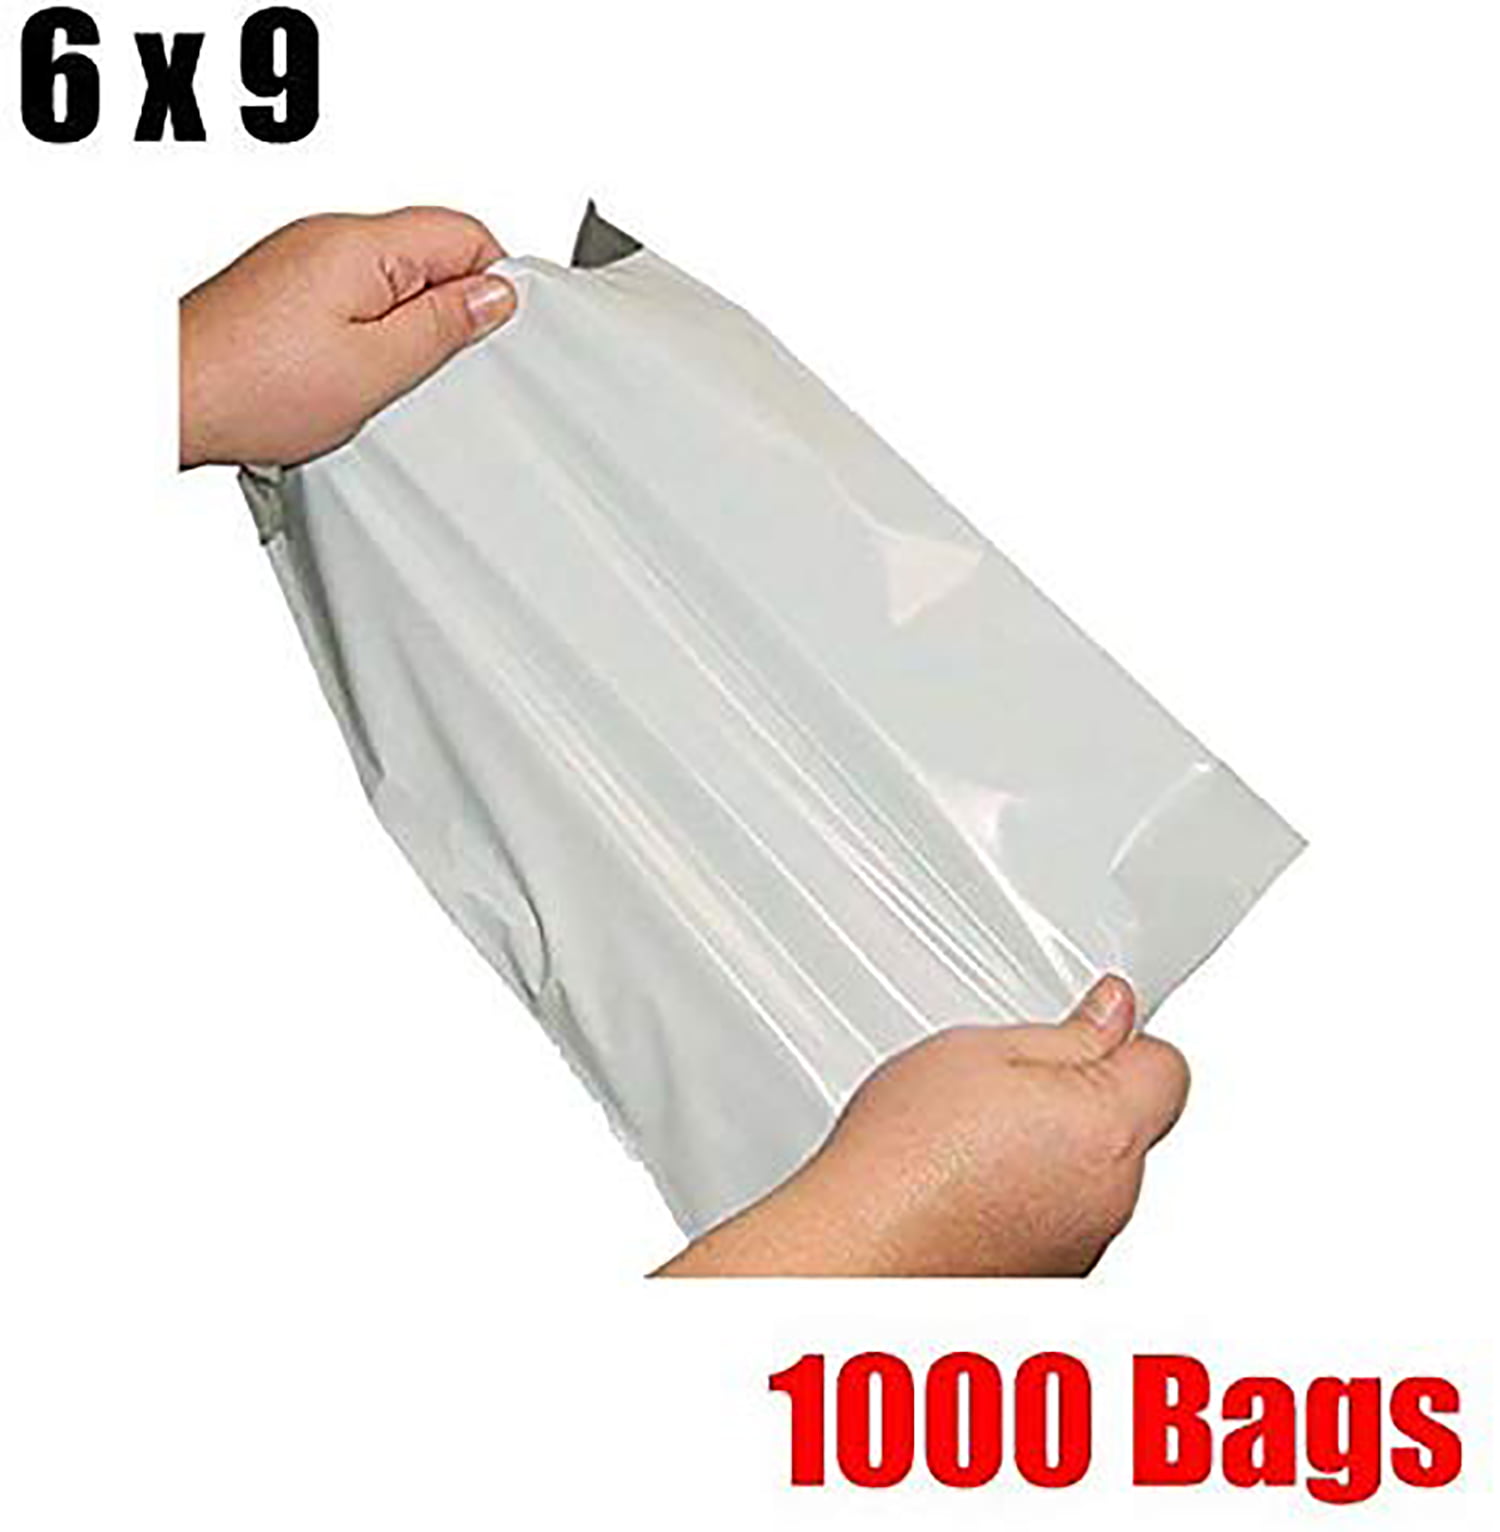 Quality 400 Bags 200 each 6x9 & 19x24 Poly Mailers Shipping Envelopes Bags 